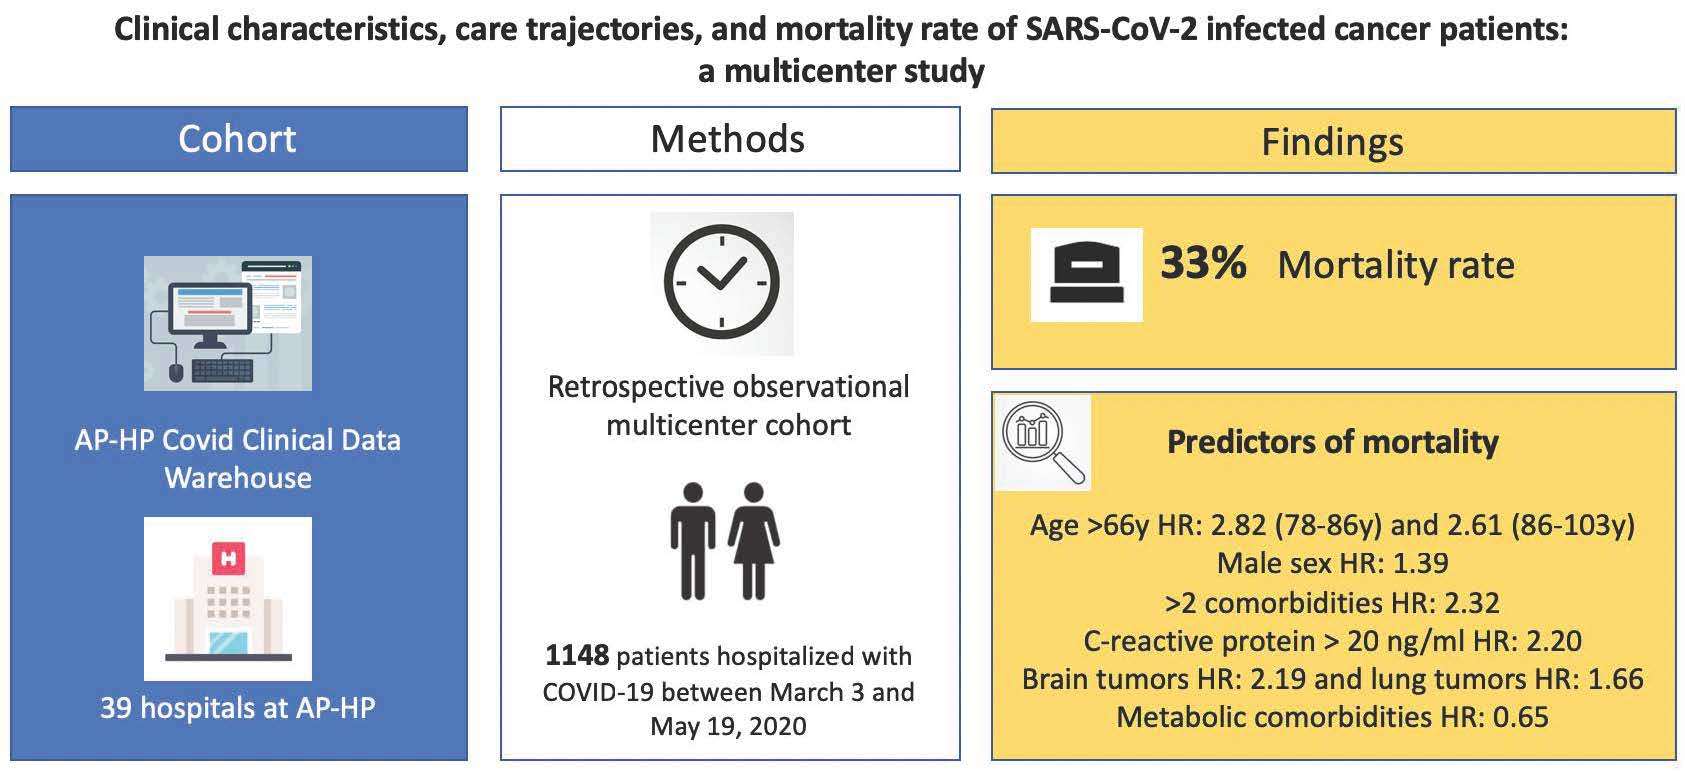 Cancers | Free Full-Text | Clinical Characteristics, Care Trajectories and  Mortality Rate of SARS-CoV-2 Infected Cancer Patients: A Multicenter Cohort  Study | HTML